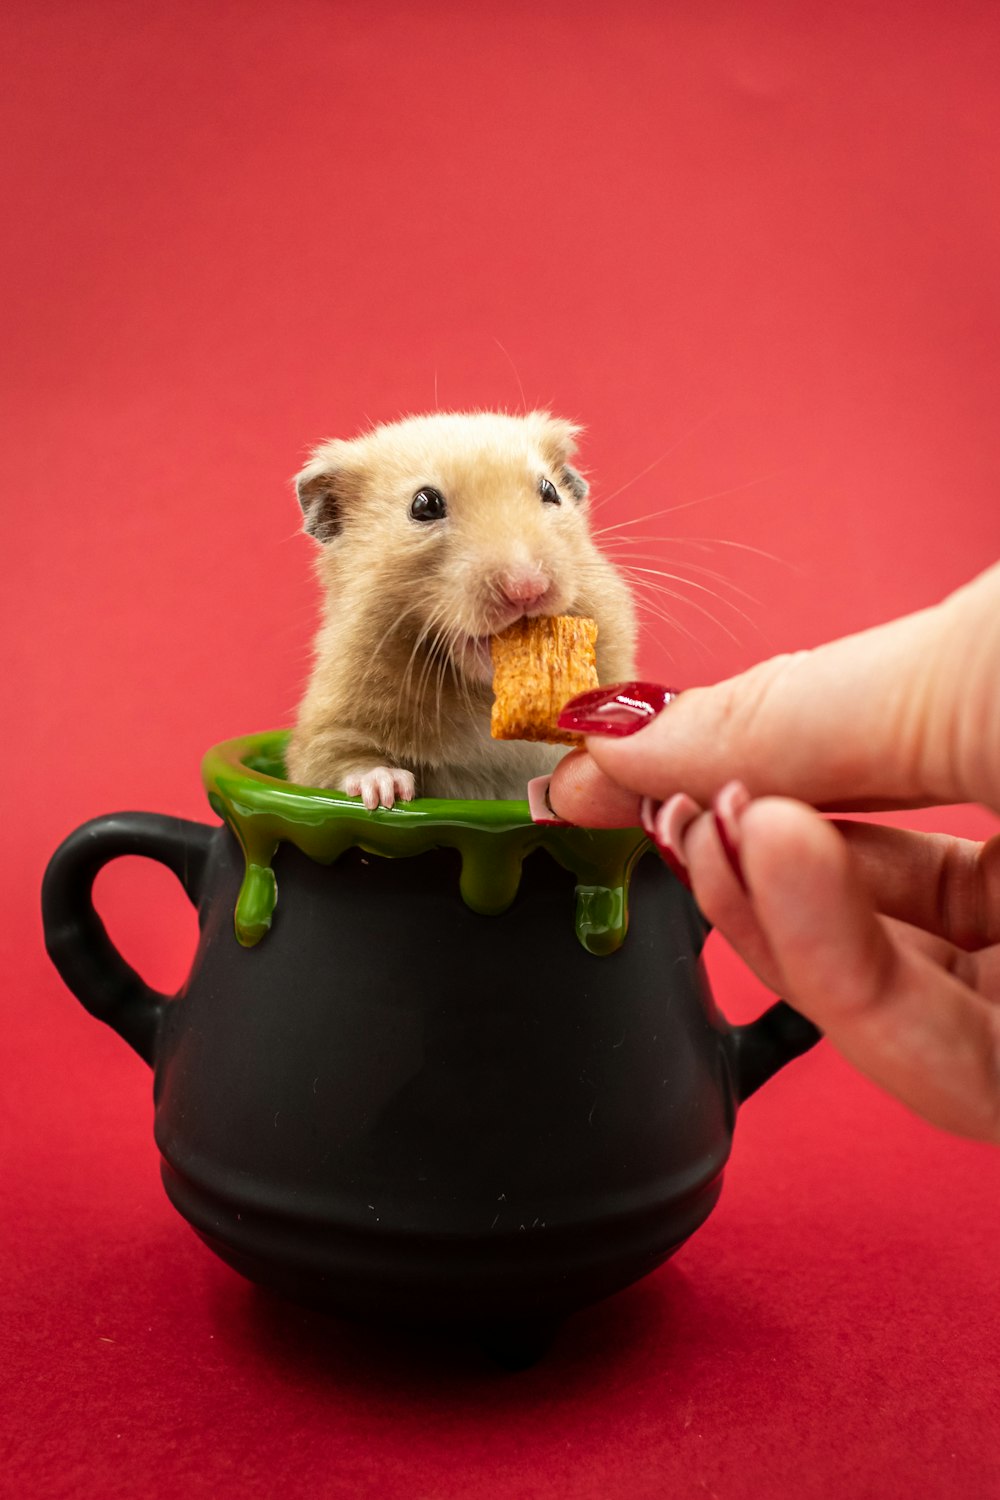 a hamster eating a piece of bread in a pot